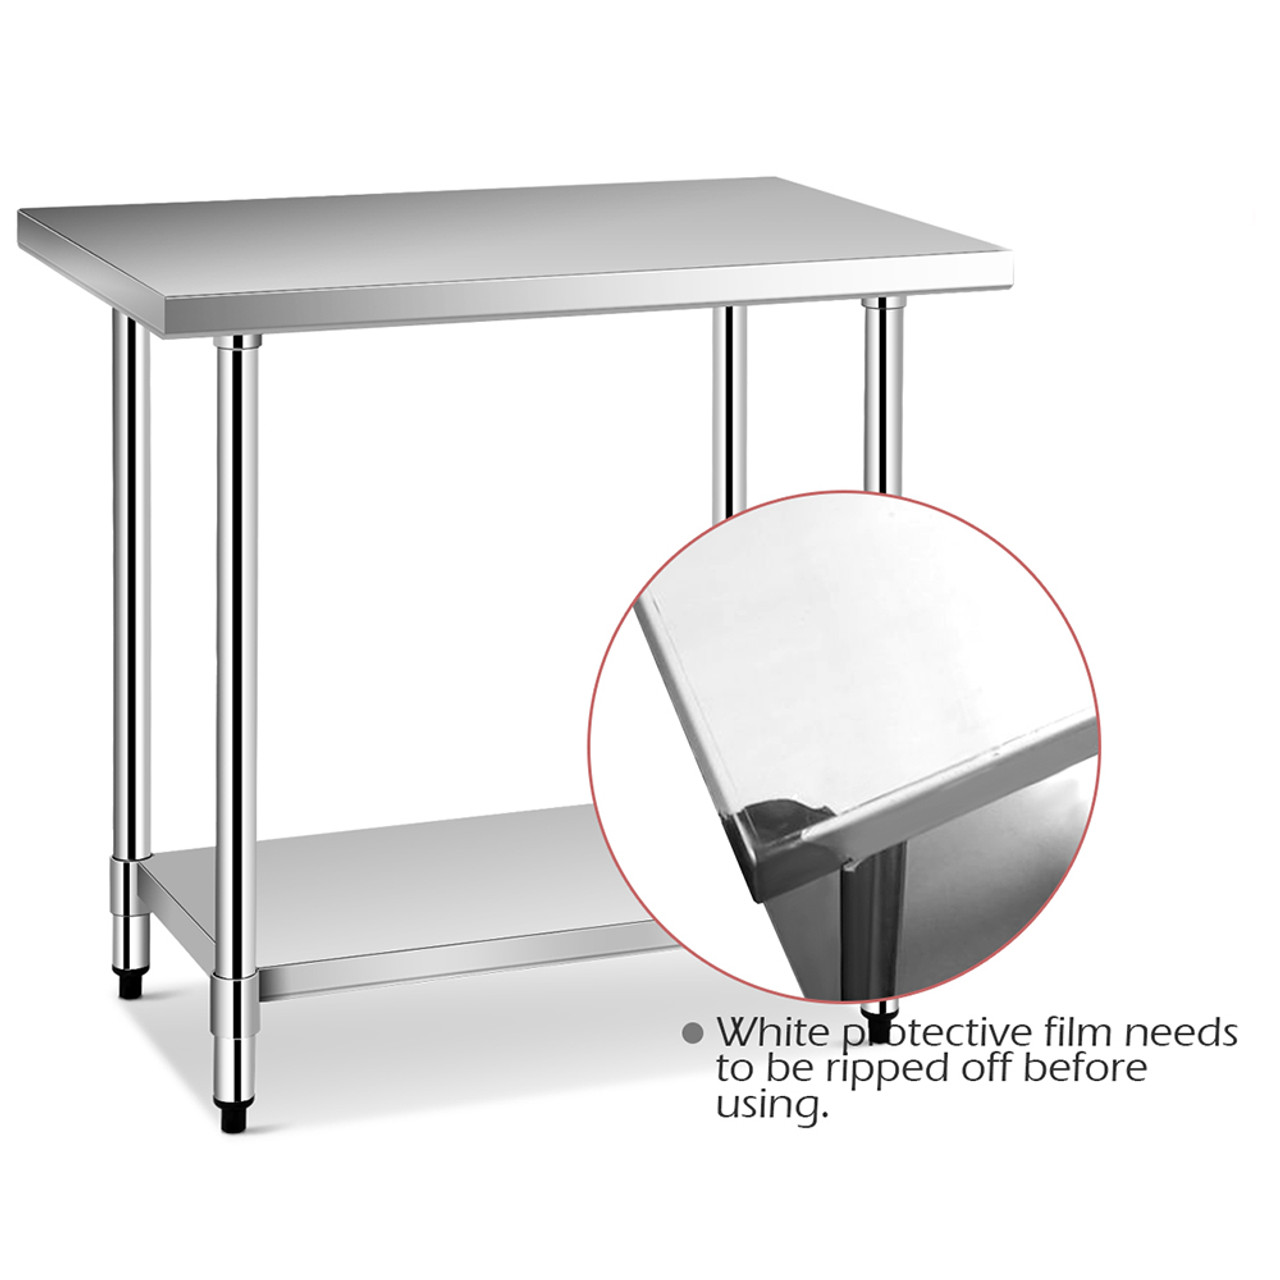 2' x 3' Stainless Steel Food Prep Work Table product image